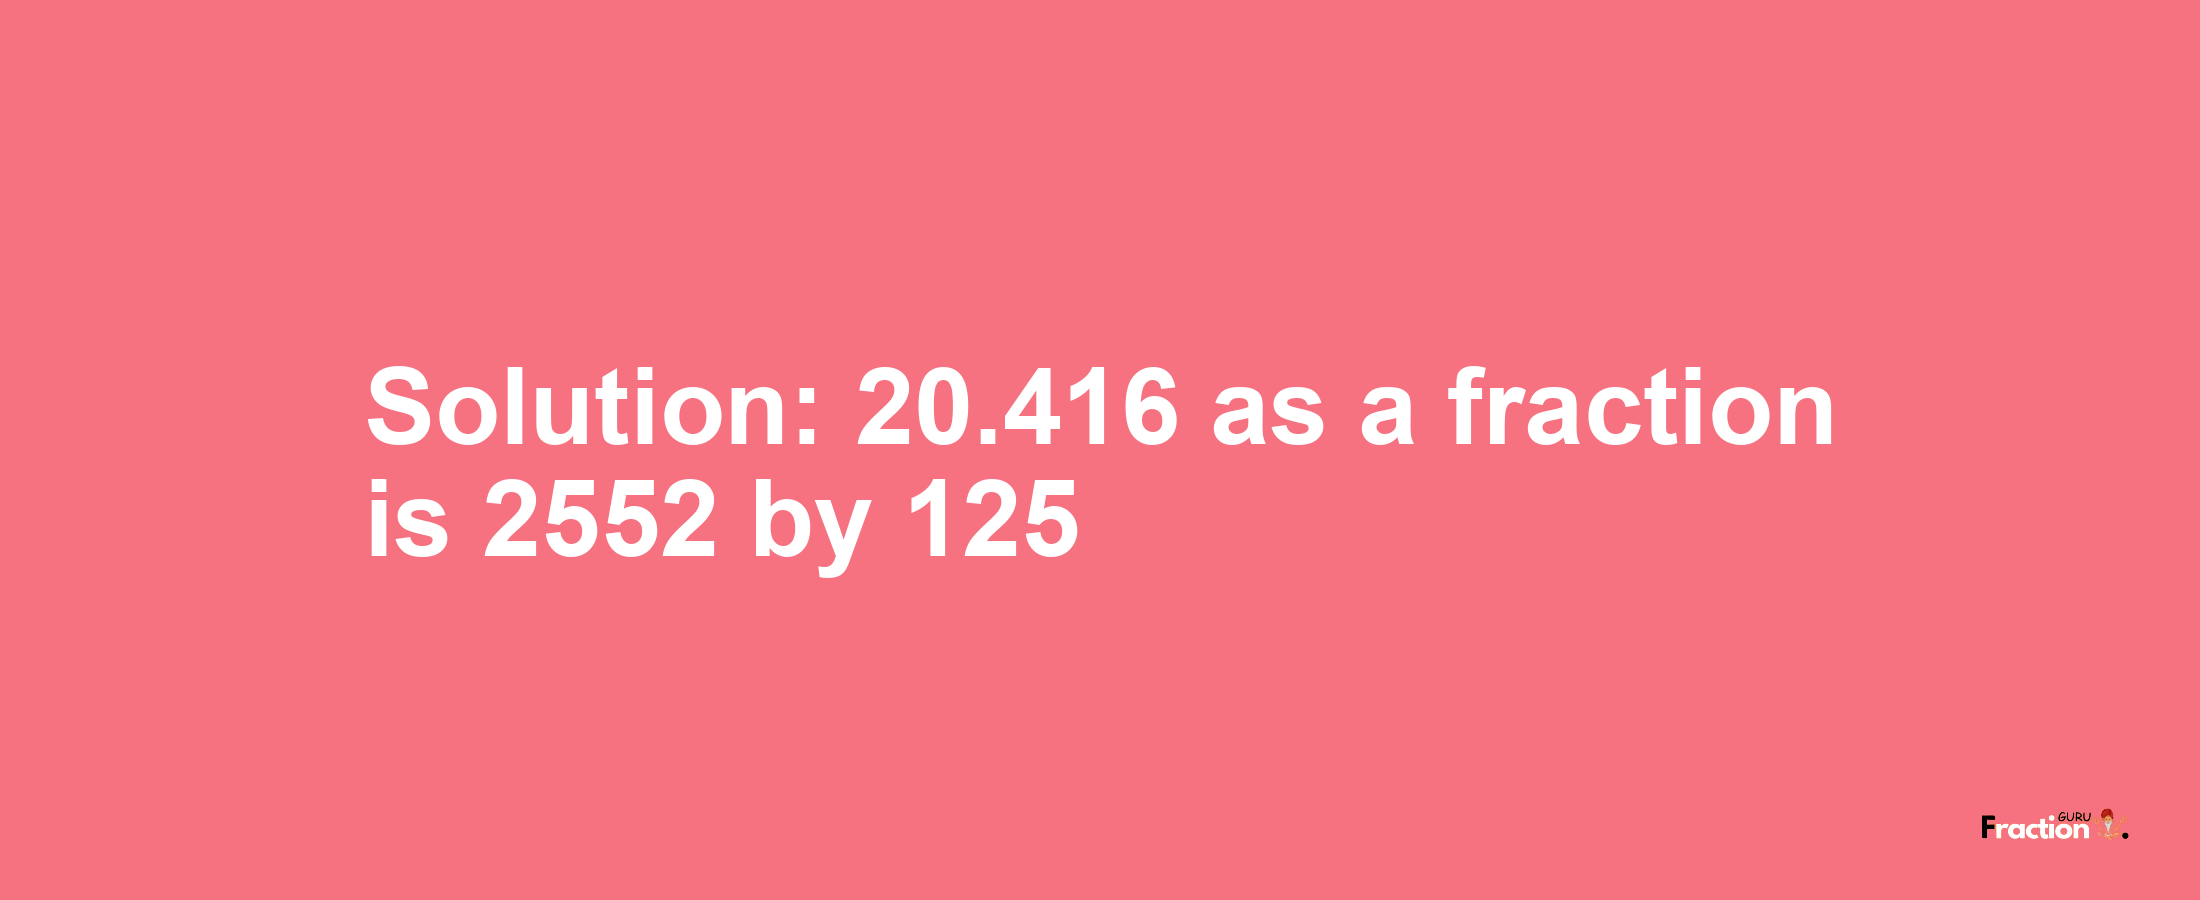 Solution:20.416 as a fraction is 2552/125